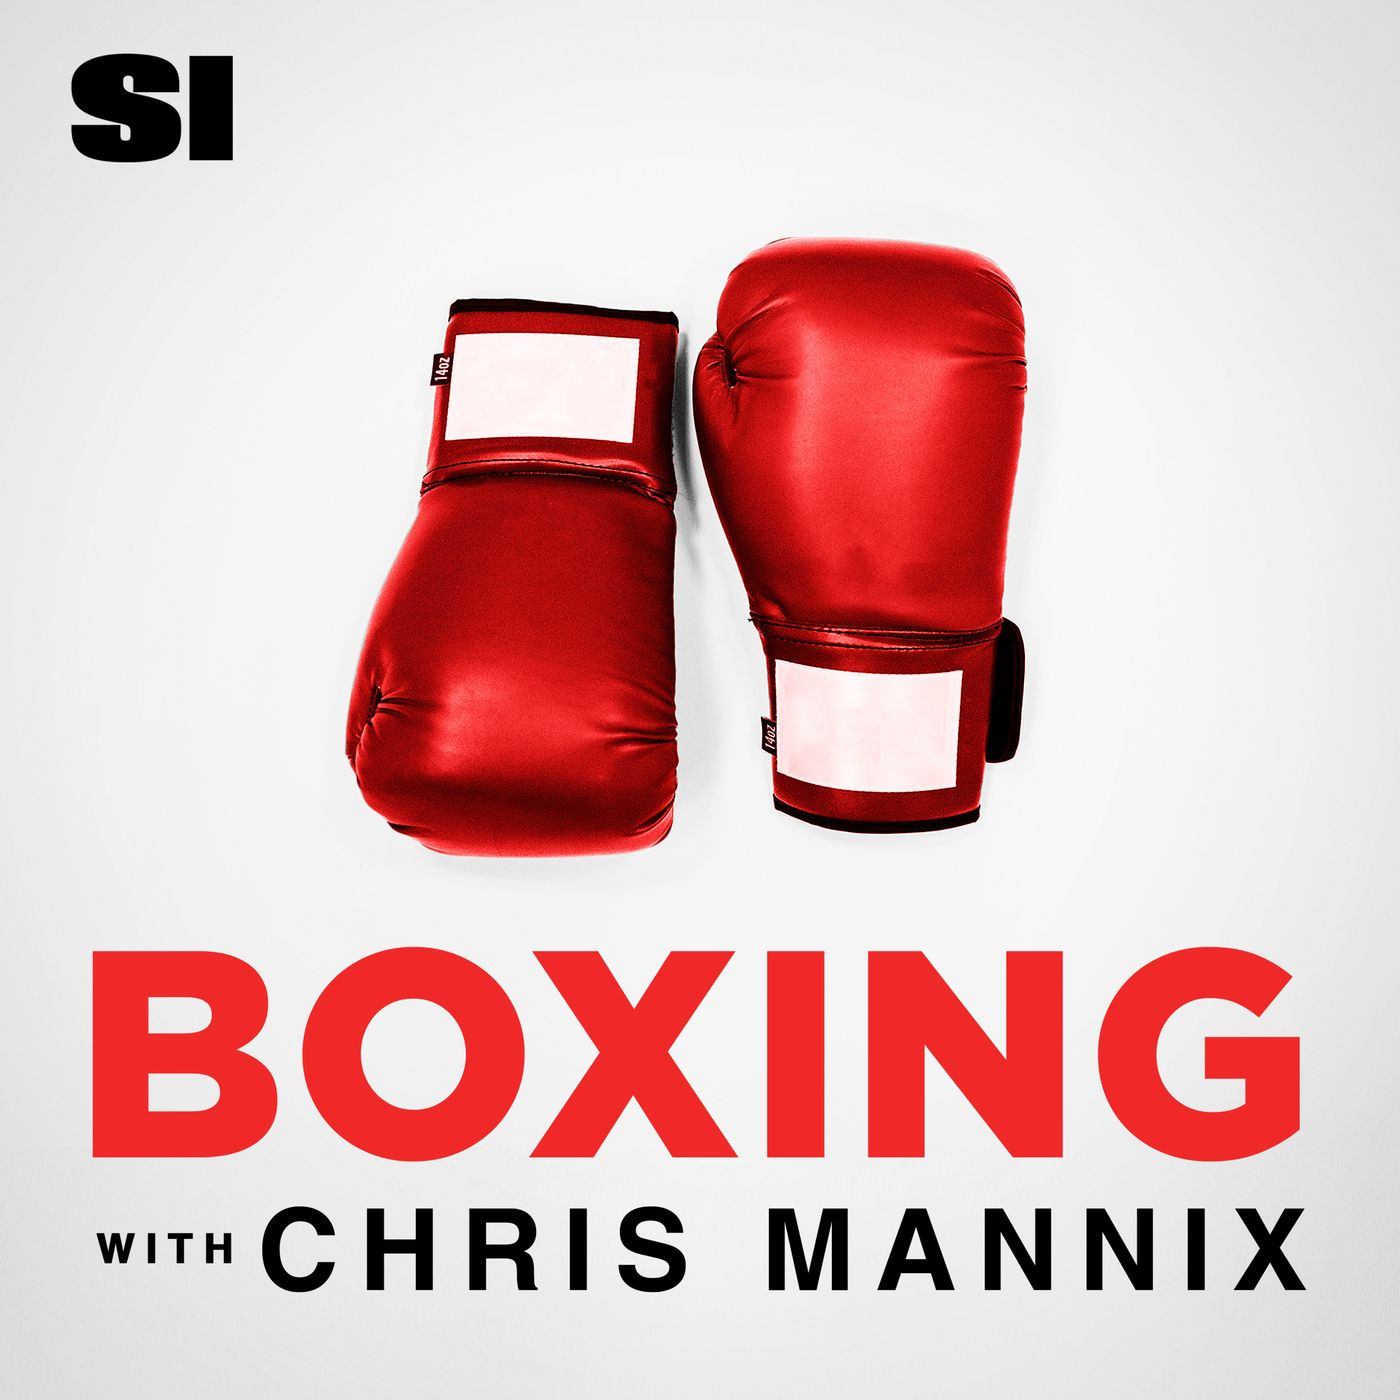 A highlight from 3 Points with Chris Mannix - Chris Forsberg on the Celtics